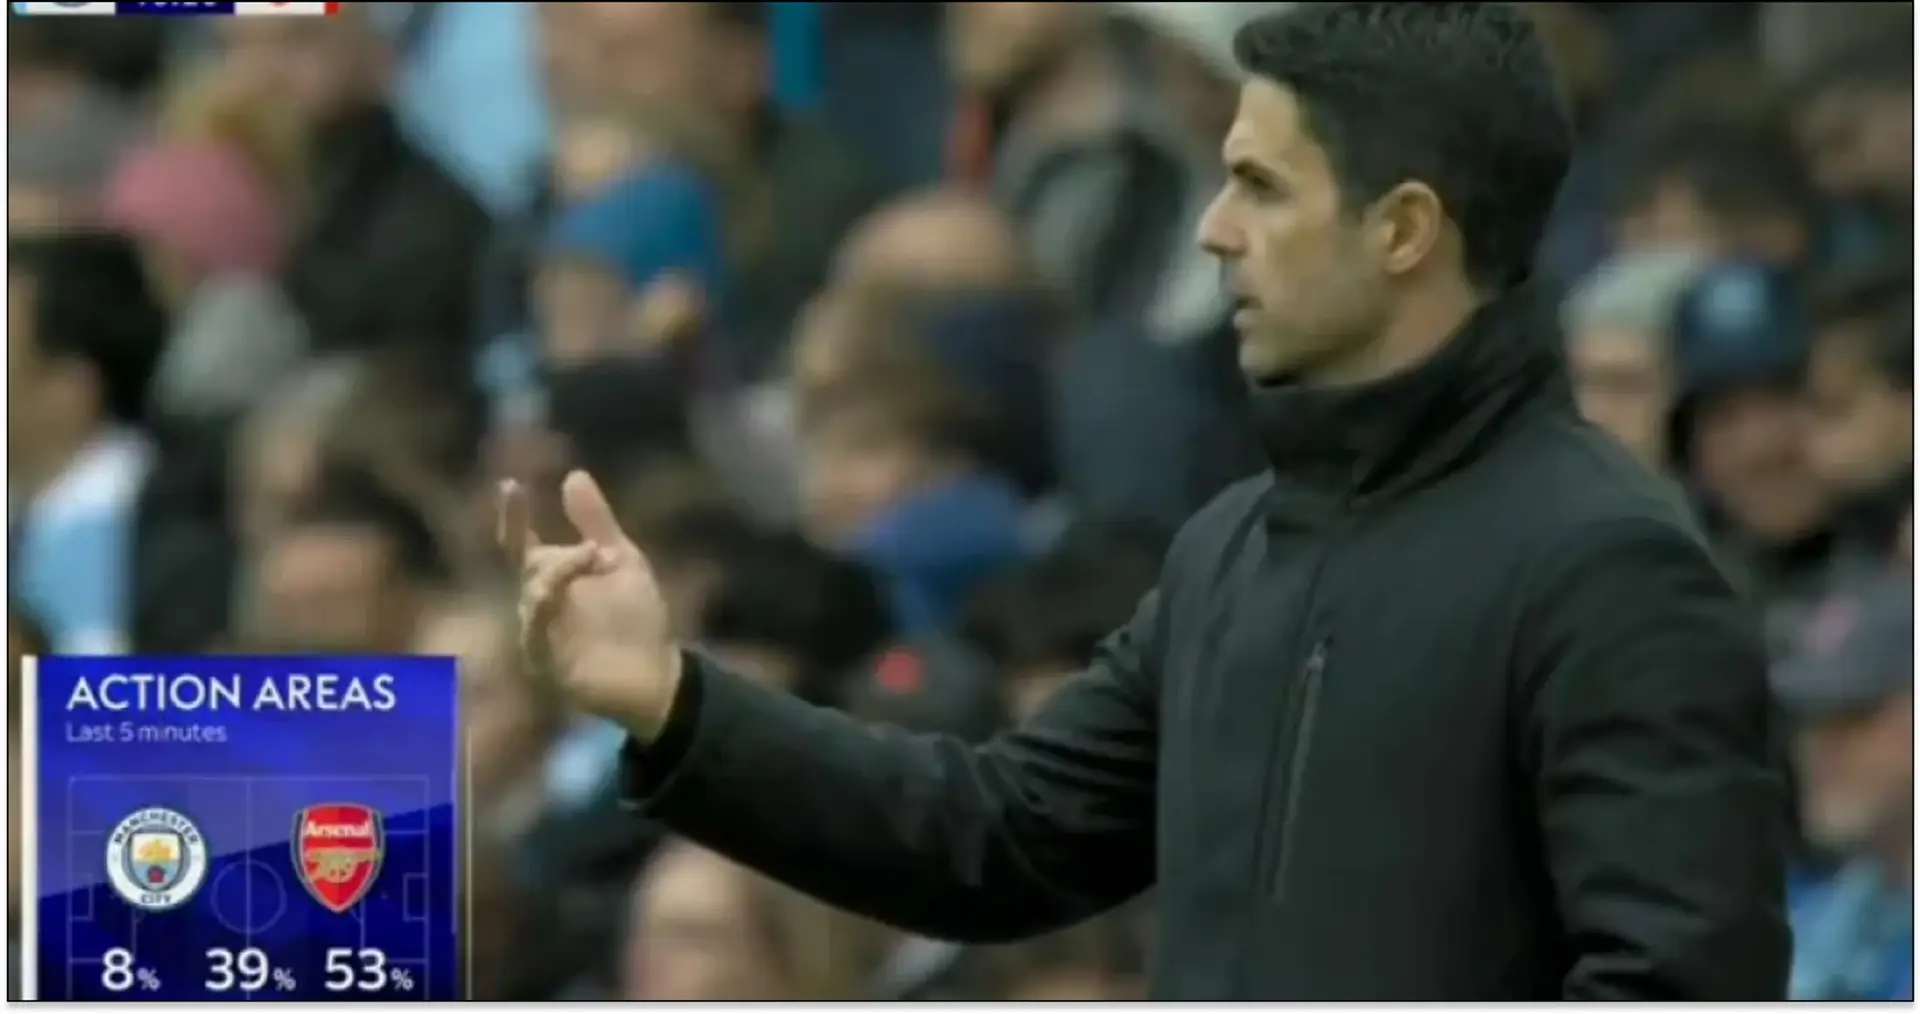 'Arteta is the new Mourinho': Man City fans moan about Arsenal tactics in 0-0 draw